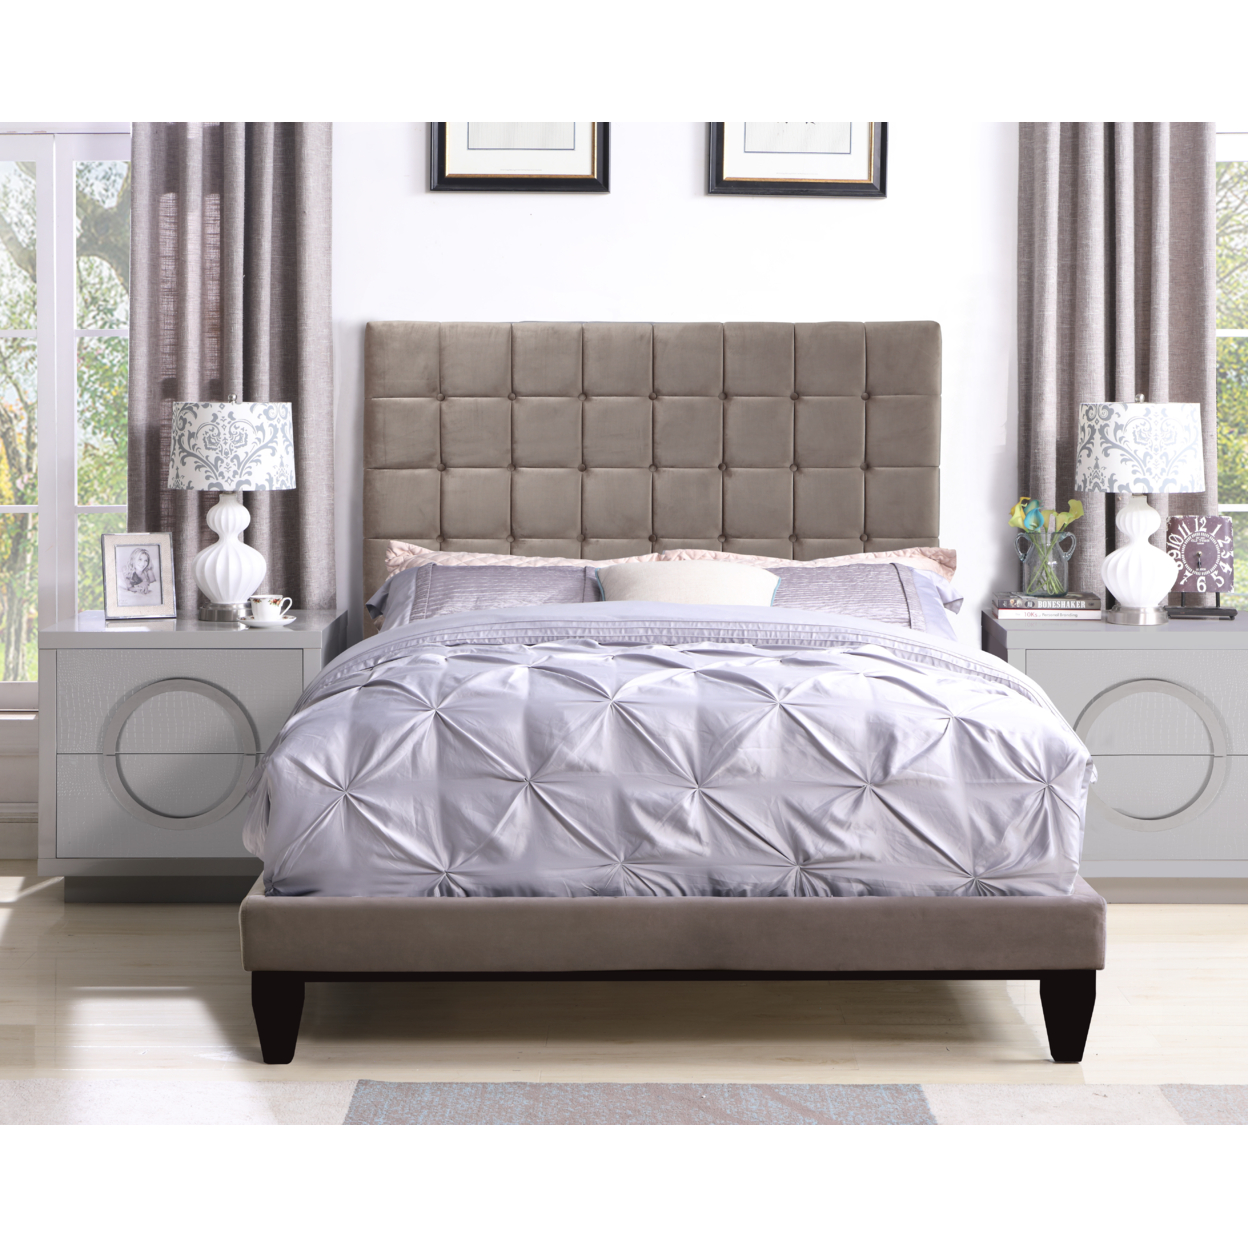 Chopin Bed Frame With Headboard Velvet Upholstered Button Tufted Tapered Birch Legs - Taupe, Queen